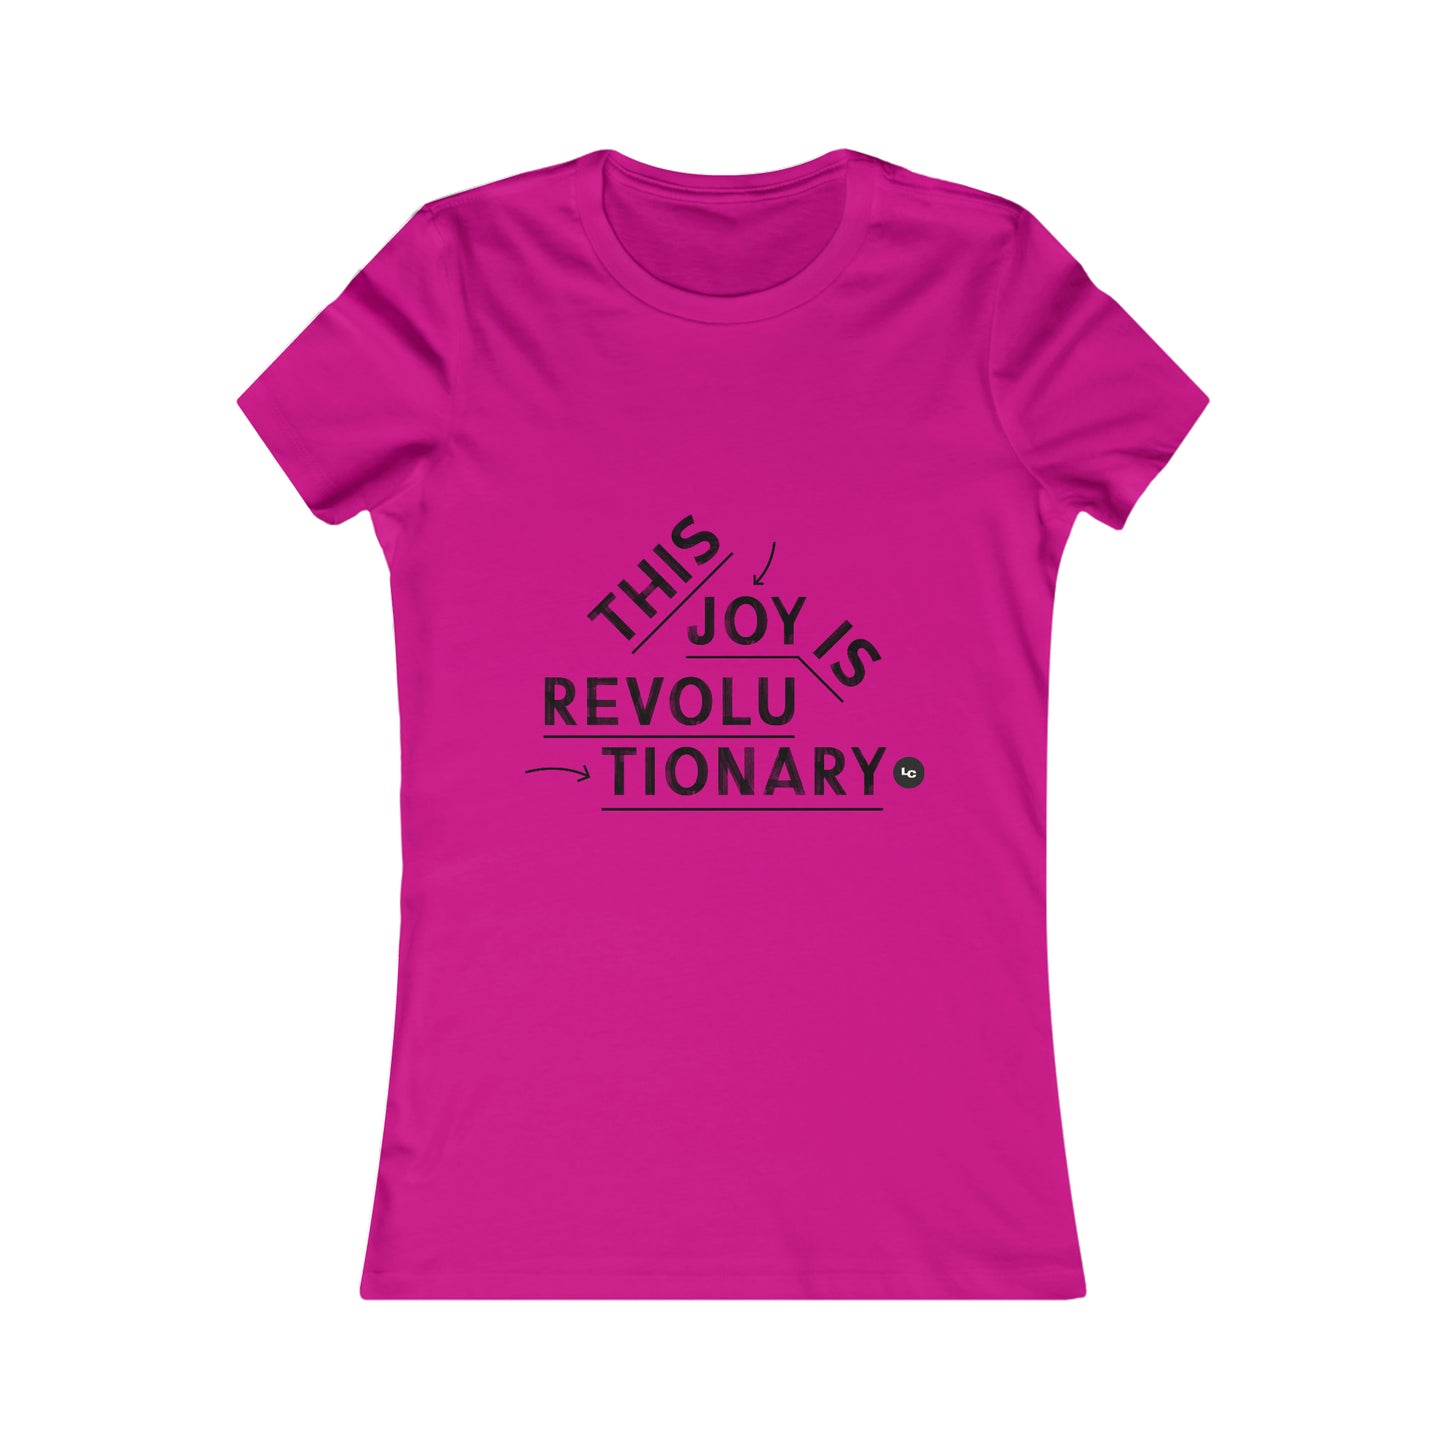 Our Joy is Revolutionary Tee